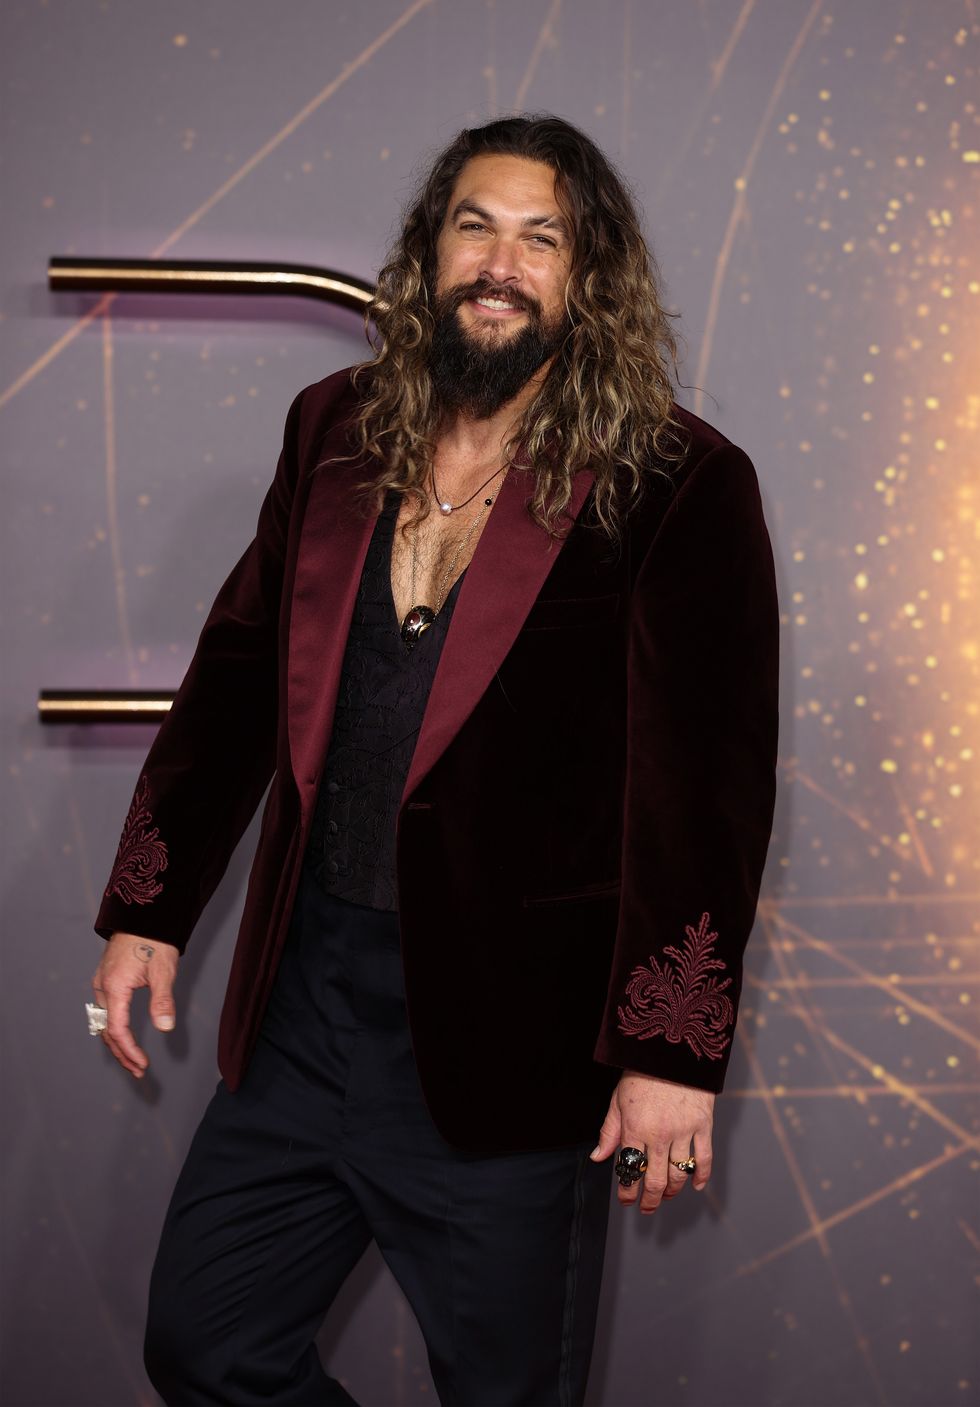 jason momoa smiles on the red carpet at a movie premiere